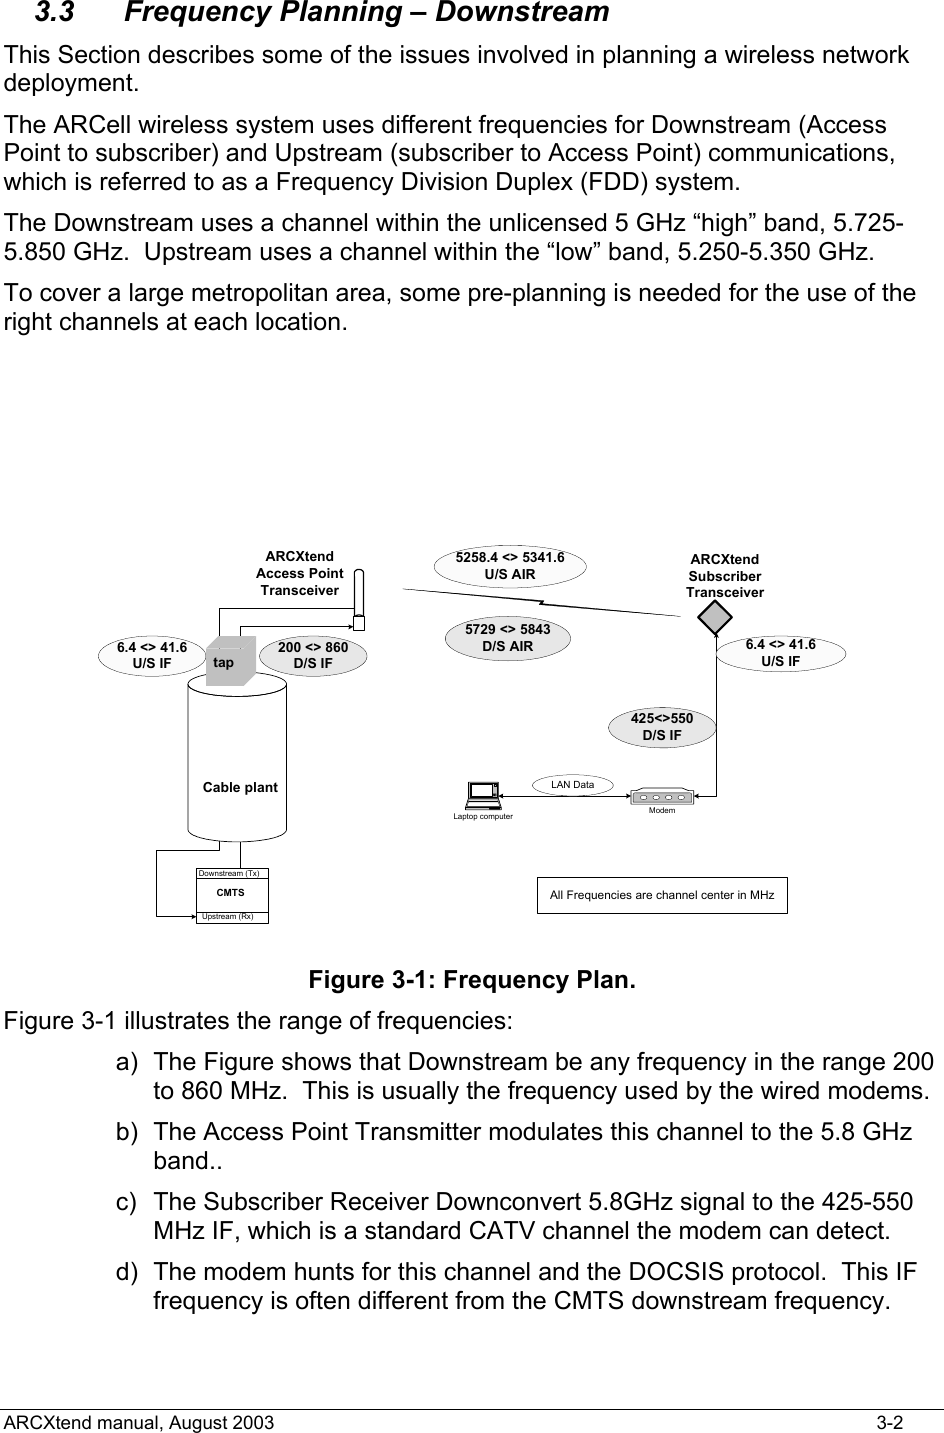  3.3  Frequency Planning – Downstream This Section describes some of the issues involved in planning a wireless network deployment. The ARCell wireless system uses different frequencies for Downstream (Access Point to subscriber) and Upstream (subscriber to Access Point) communications, which is referred to as a Frequency Division Duplex (FDD) system. The Downstream uses a channel within the unlicensed 5 GHz “high” band, 5.725-5.850 GHz.  Upstream uses a channel within the “low” band, 5.250-5.350 GHz. To cover a large metropolitan area, some pre-planning is needed for the use of the right channels at each location.  6.4 &lt;&gt; 41.6U/S IF200 &lt;&gt; 860D/S IFARCXtendSubscriberTransceiver5729 &lt;&gt; 5843D/S AIR5258.4 &lt;&gt; 5341.6U/S AIRModem425&lt;&gt;550D/S IF6.4 &lt;&gt; 41.6U/S IFLaptop computerLAN DataAll Frequencies are channel center in MHzARCXtendAccess PointTransceiverUpstream (Rx)Downstream (Tx)CMTSCable planttap Figure 3-1: Frequency Plan. Figure 3-1 illustrates the range of frequencies: a)  The Figure shows that Downstream be any frequency in the range 200 to 860 MHz.  This is usually the frequency used by the wired modems. b)  The Access Point Transmitter modulates this channel to the 5.8 GHz band.. c)  The Subscriber Receiver Downconvert 5.8GHz signal to the 425-550 MHz IF, which is a standard CATV channel the modem can detect. d)  The modem hunts for this channel and the DOCSIS protocol.  This IF frequency is often different from the CMTS downstream frequency. ARCXtend manual, August 2003    3-2 